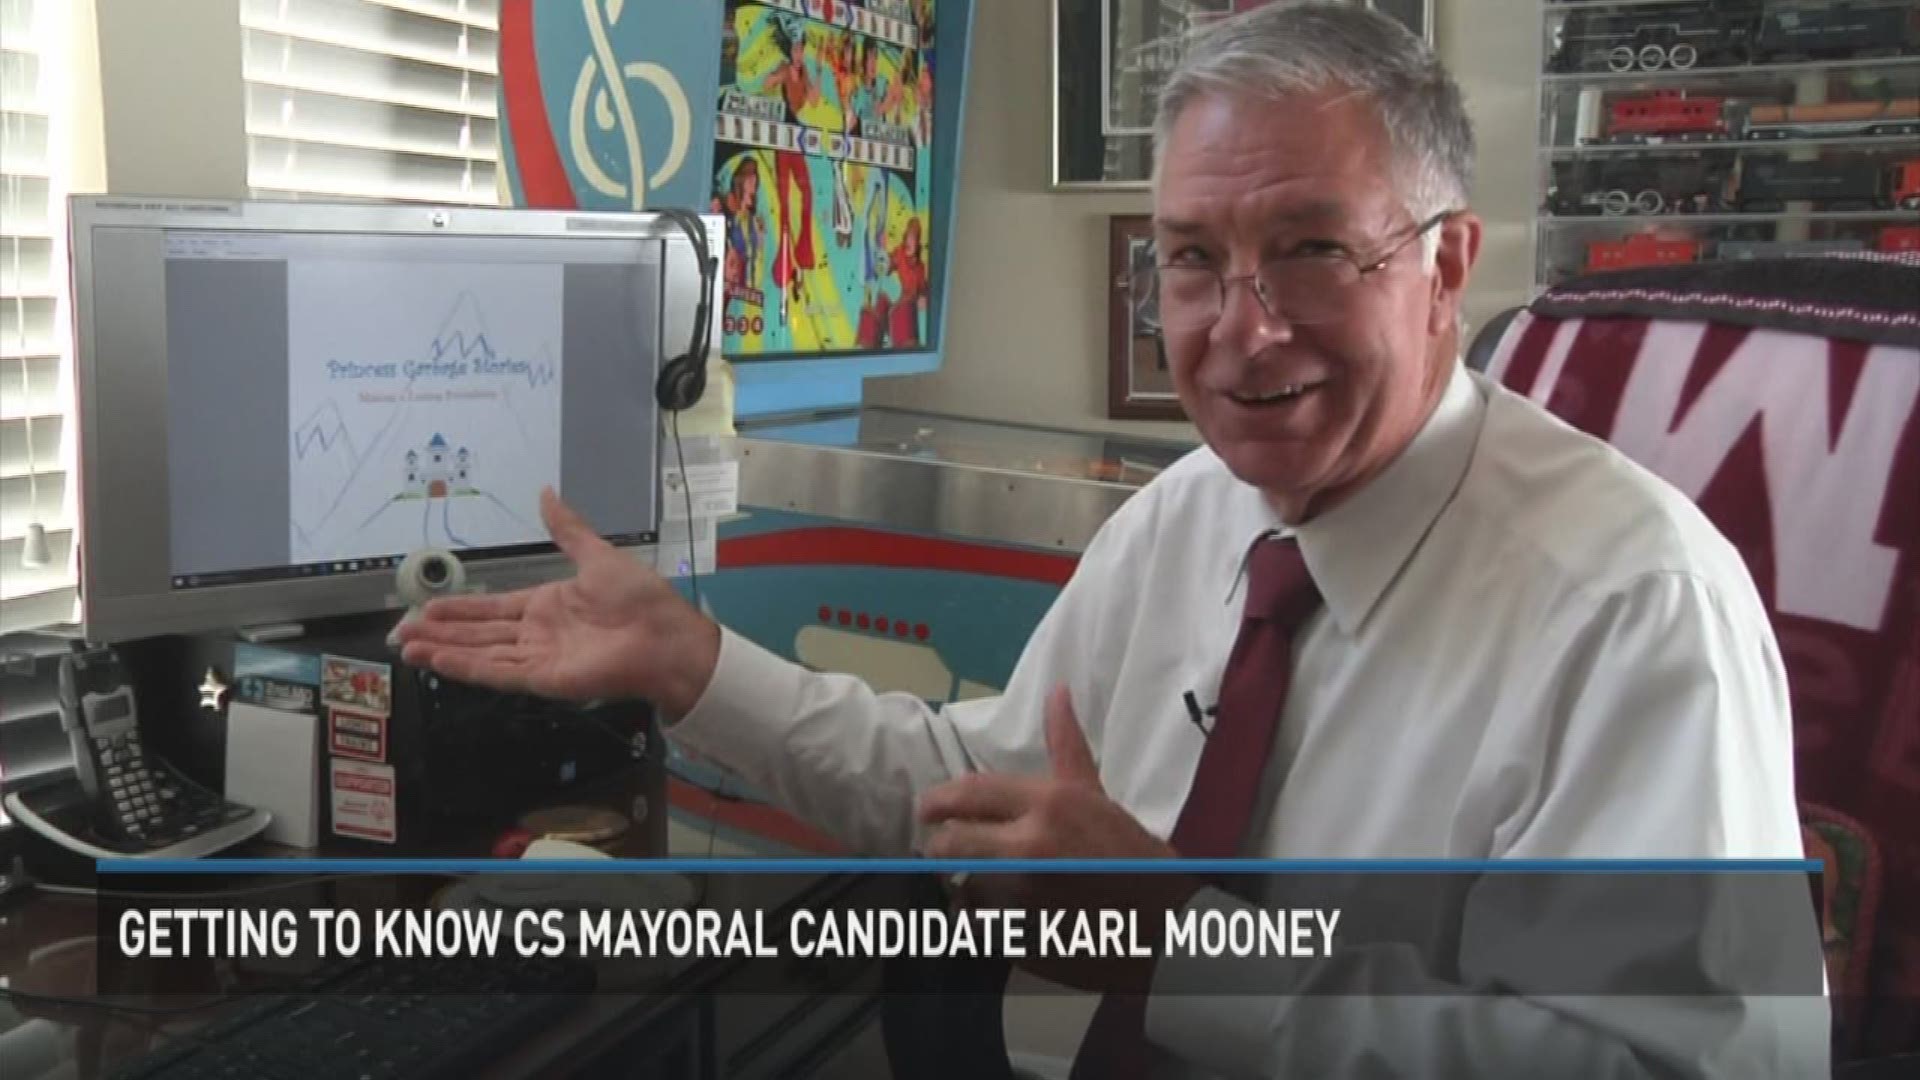 We get to know Karl Mooney who is running for mayor of College Station. 